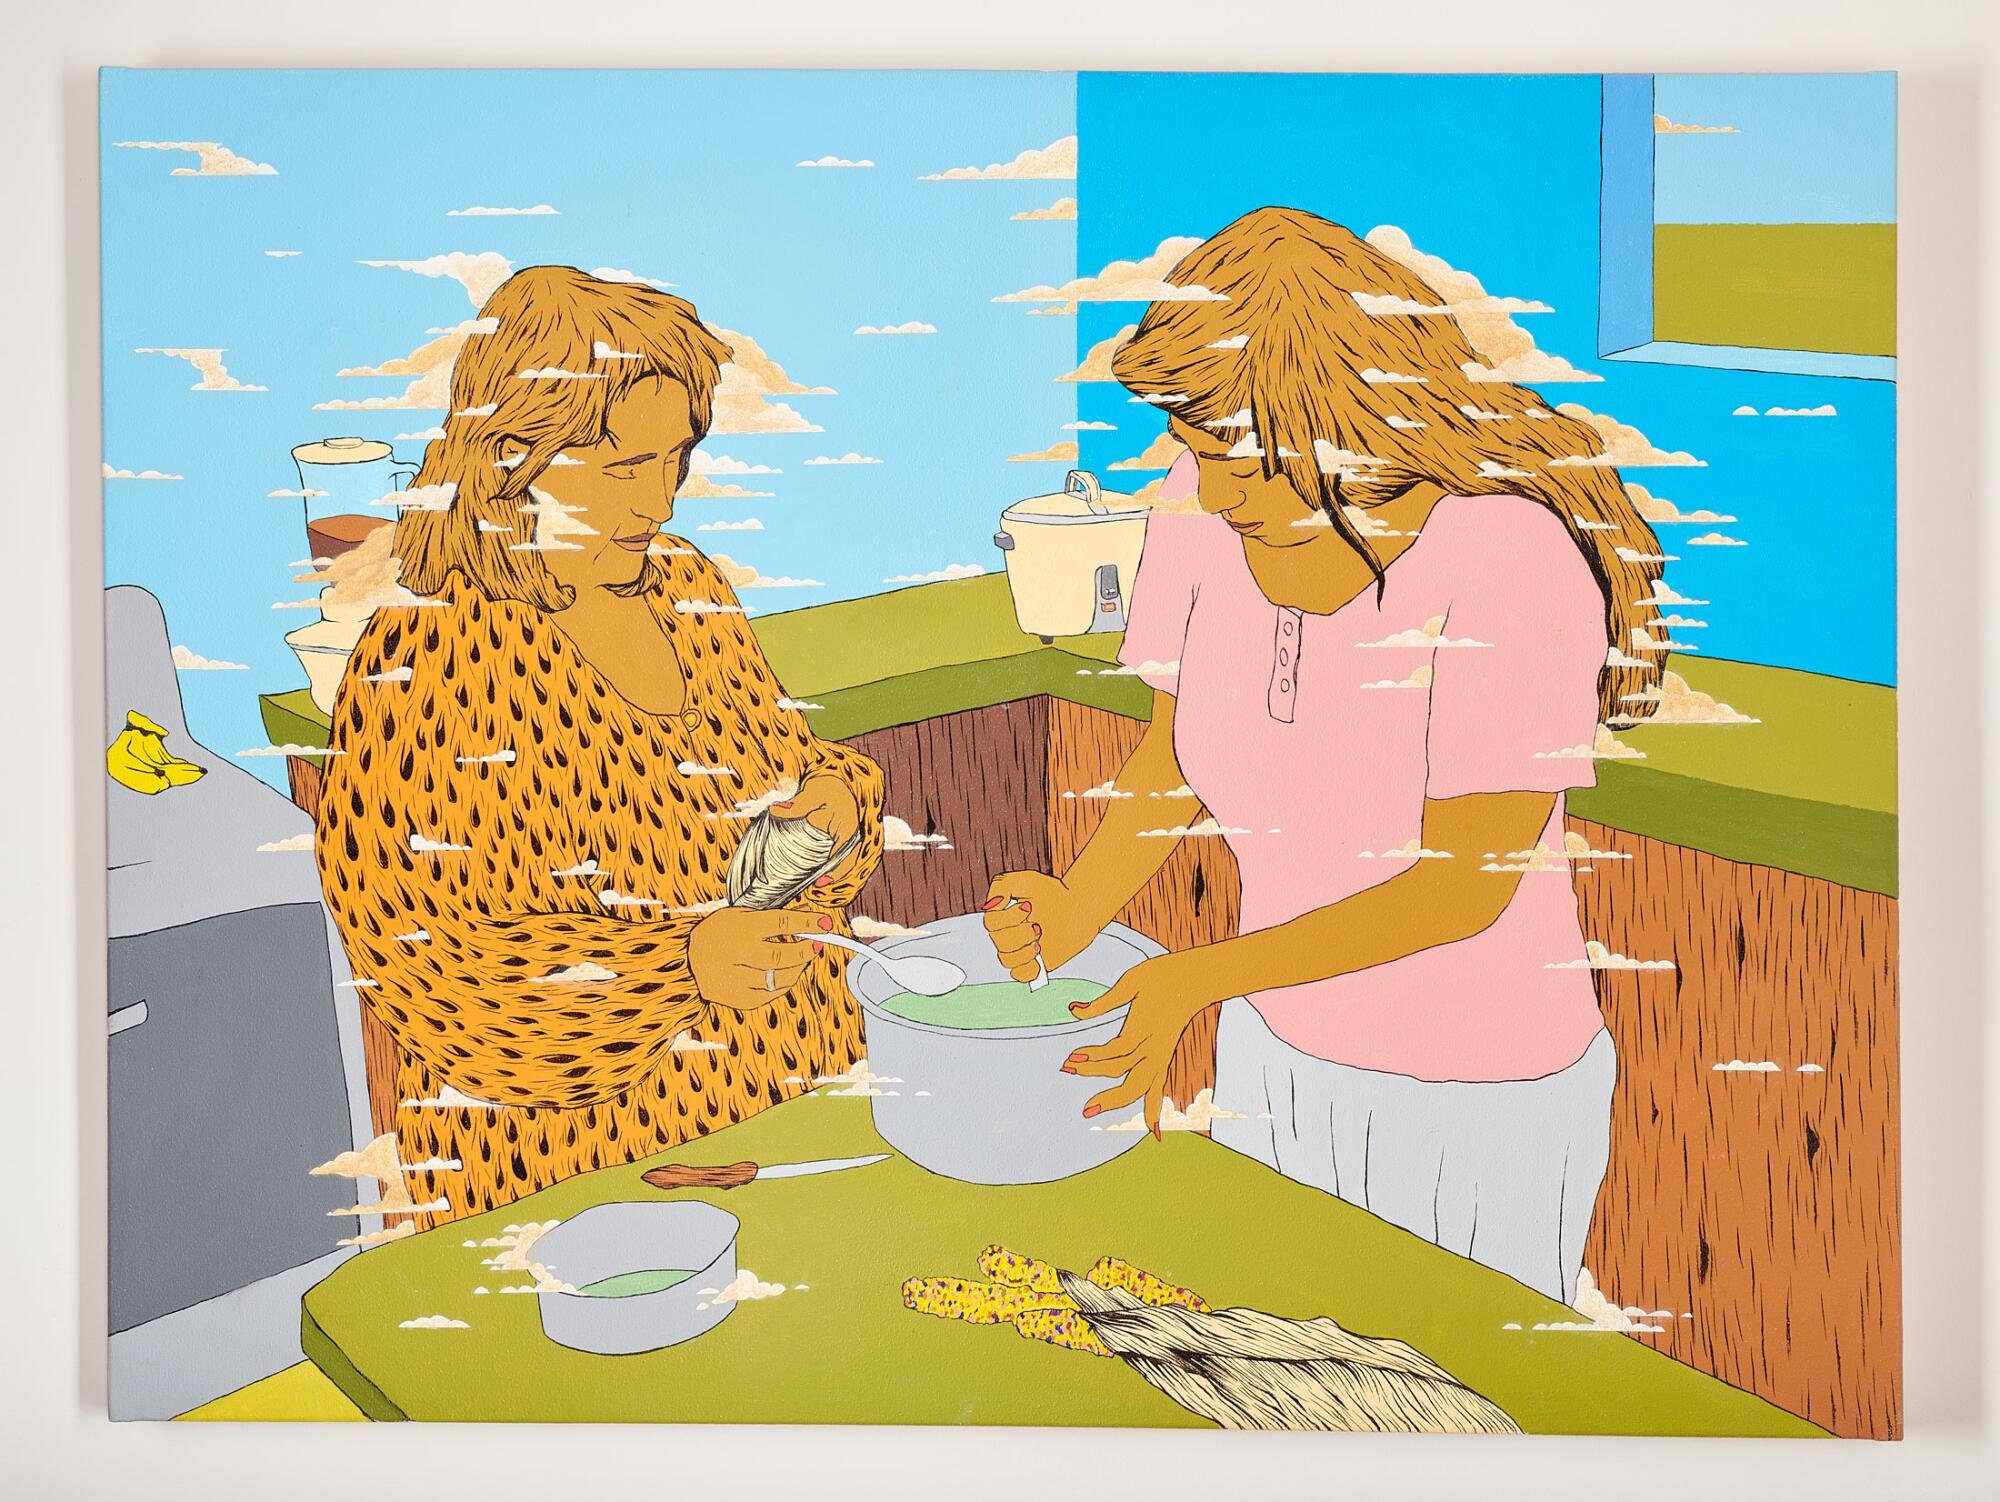 Two women, their bodies fringed by clouds, are shown making food at a kitchen table